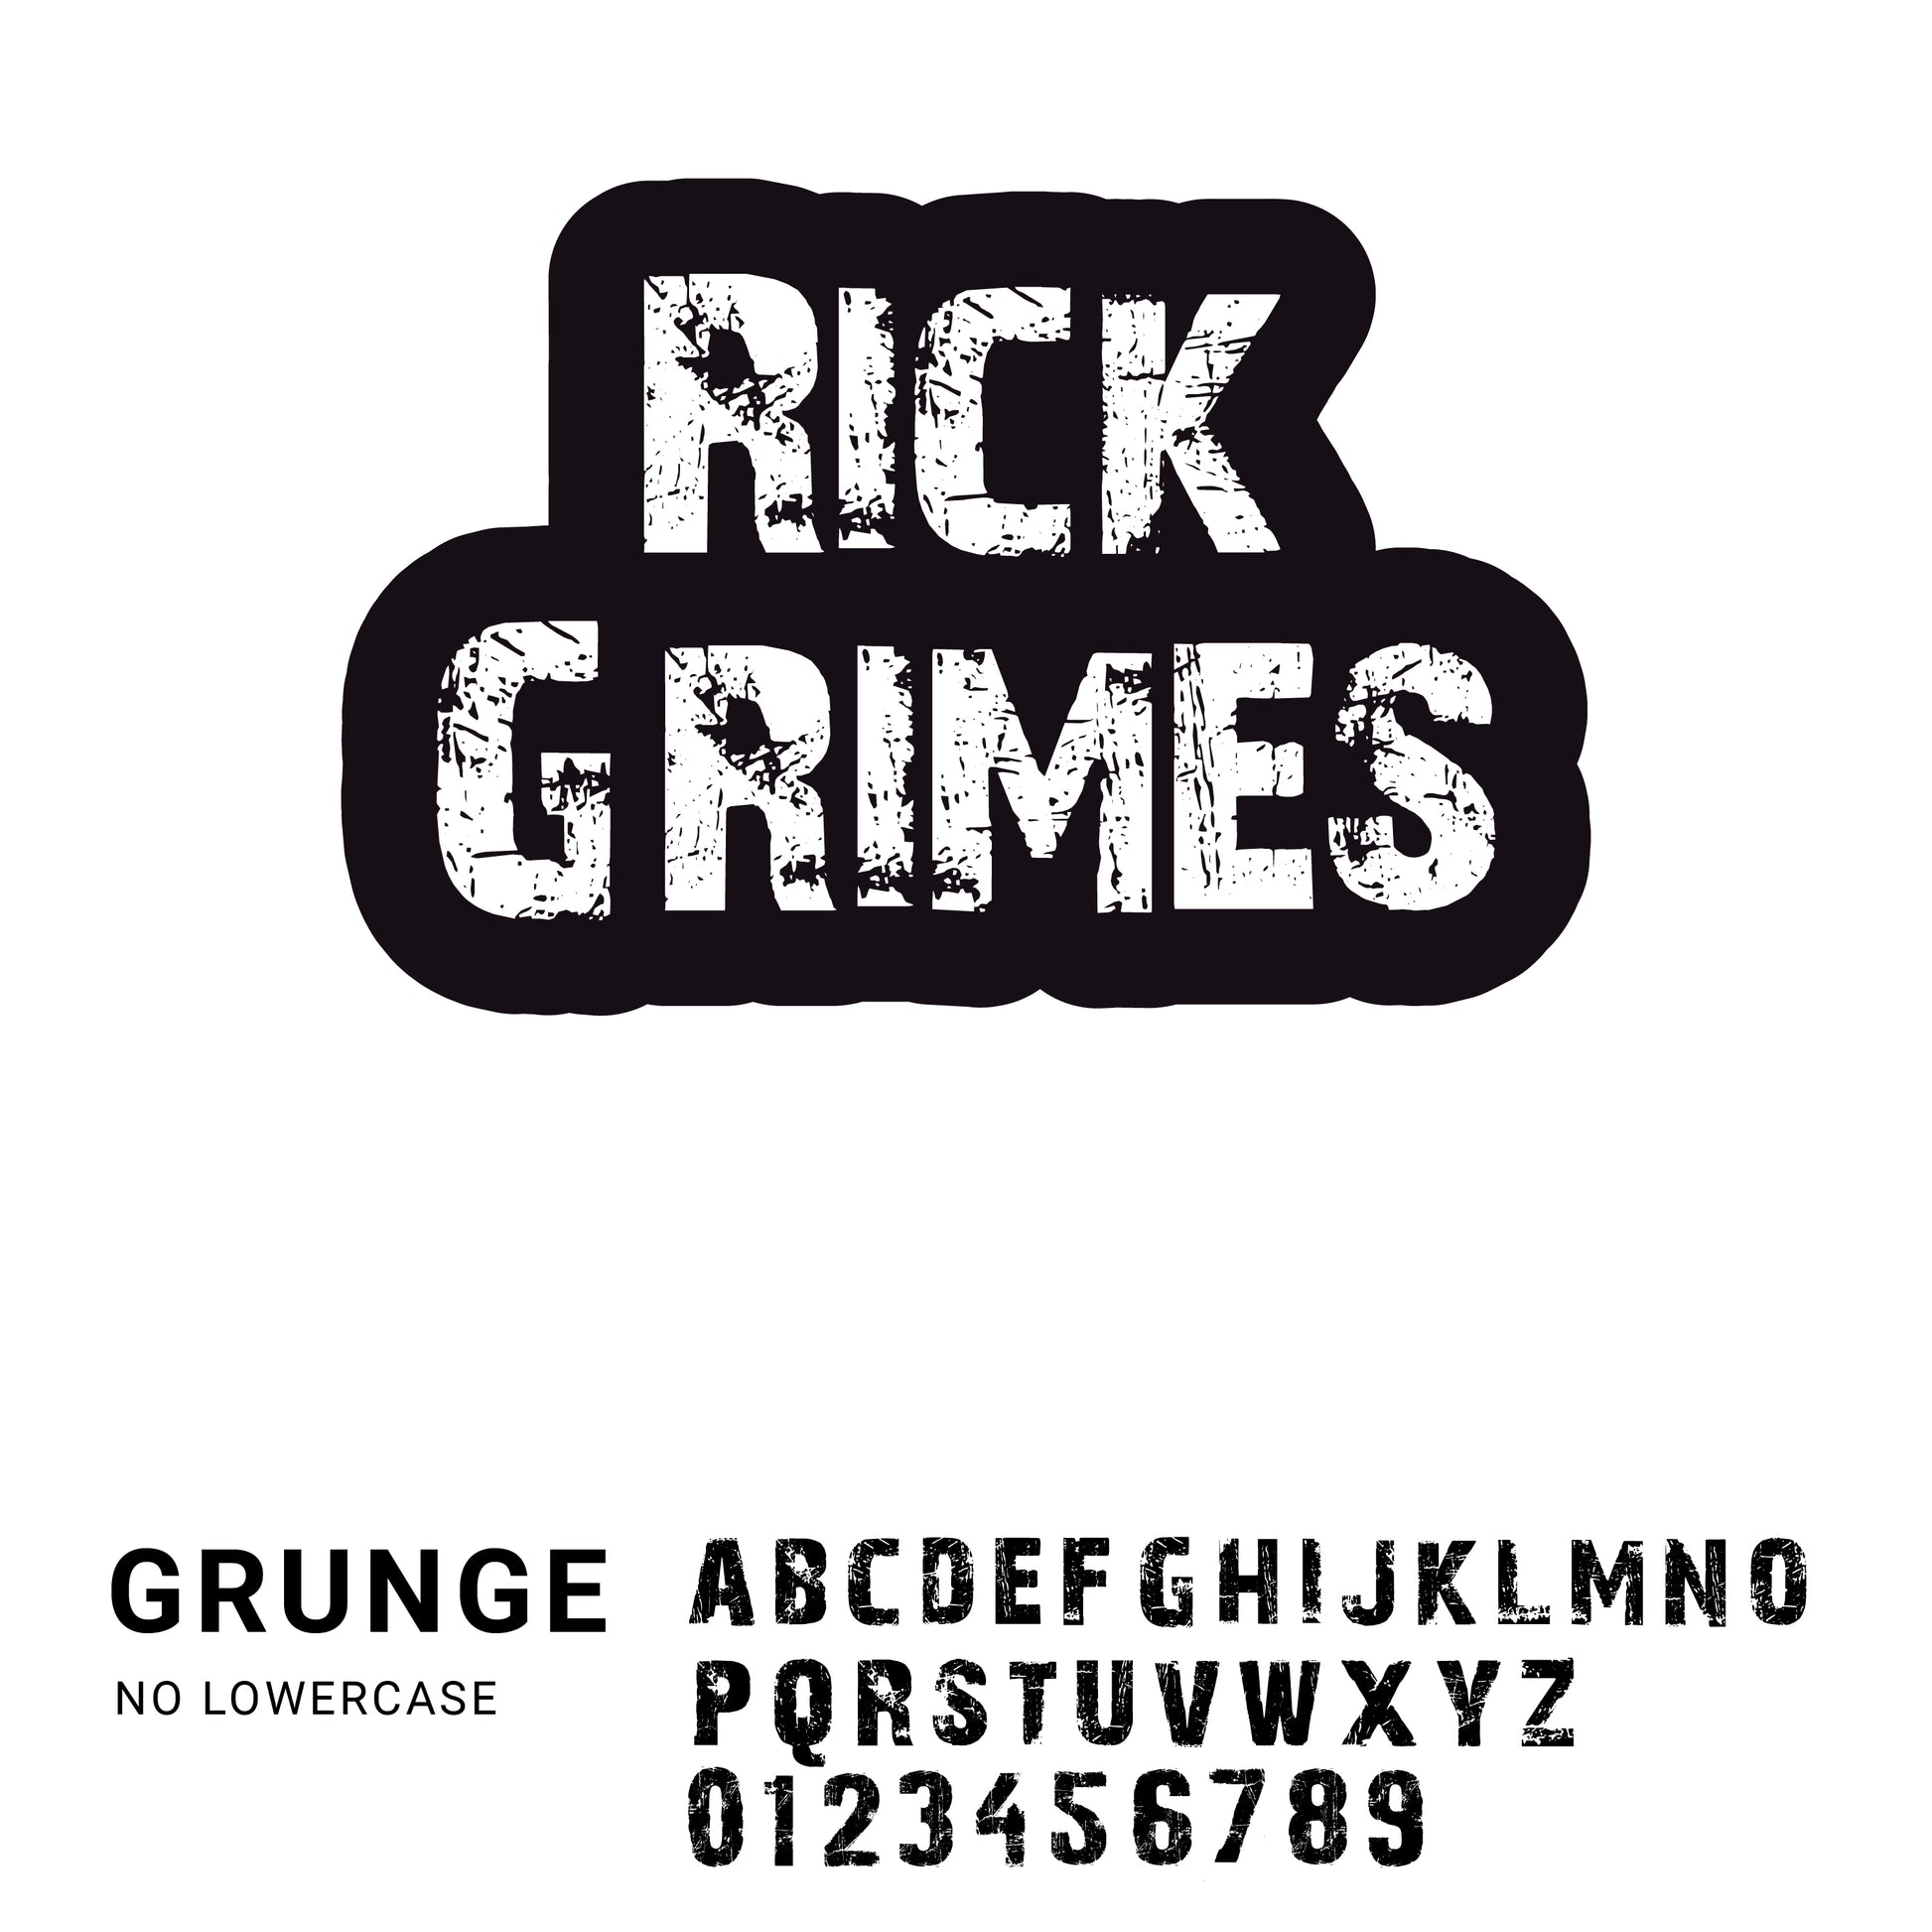 Vinyl two-line cut contour identification stickers using a grunge font: Customized stickers featuring two lines of text in a grunge font, adding a rugged and edgy look to the identification labels.